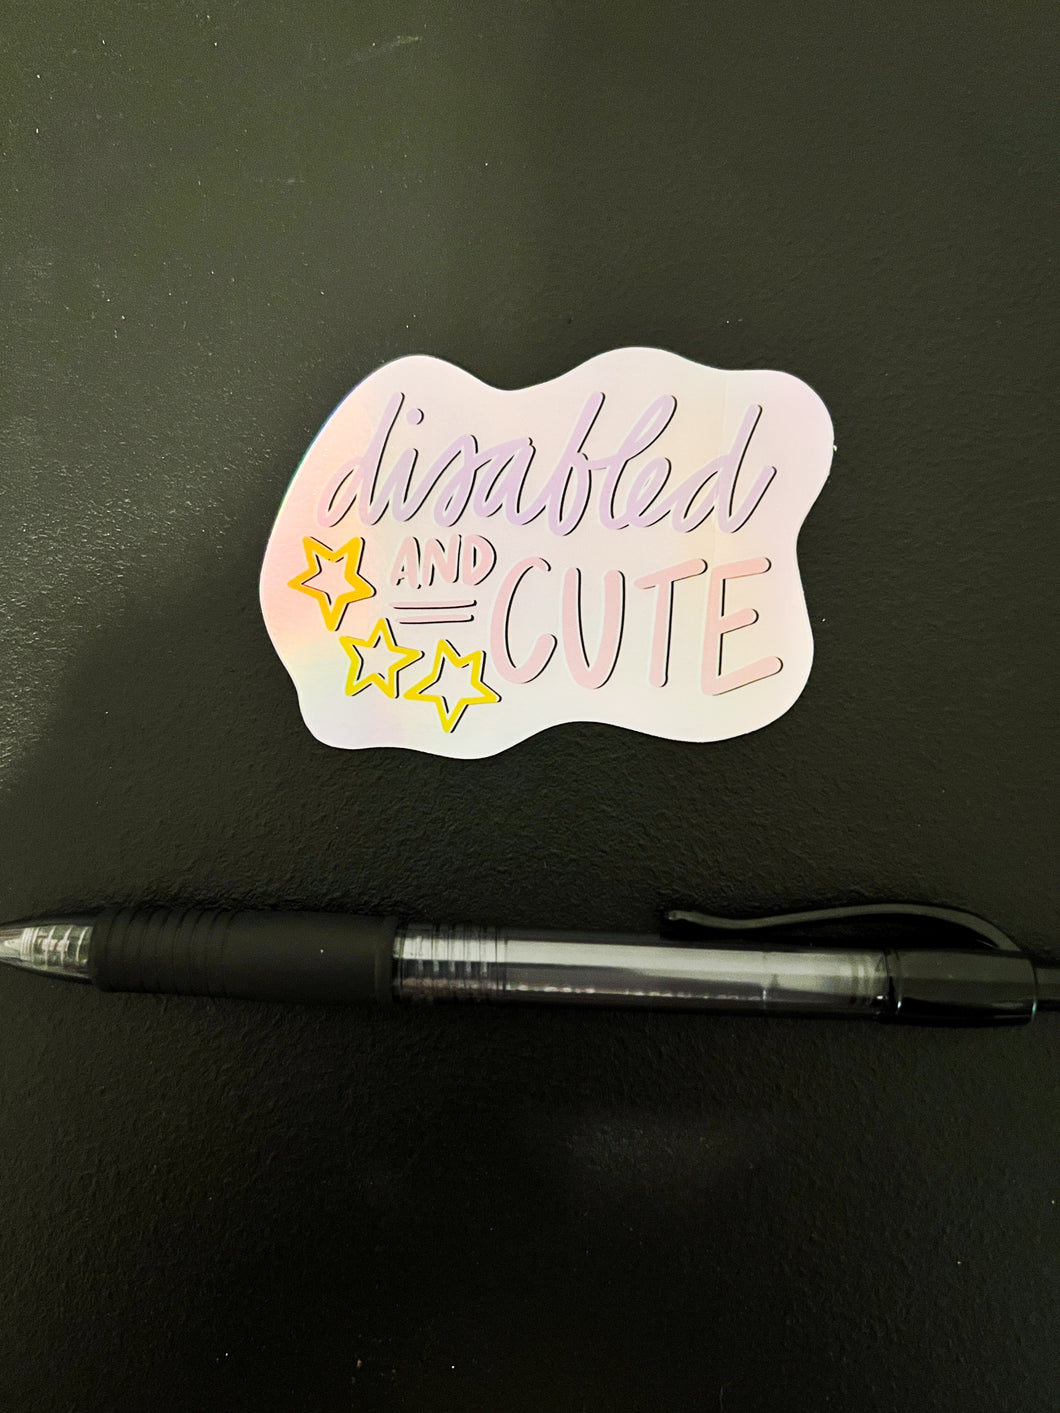 Disabled and Cute Sticker